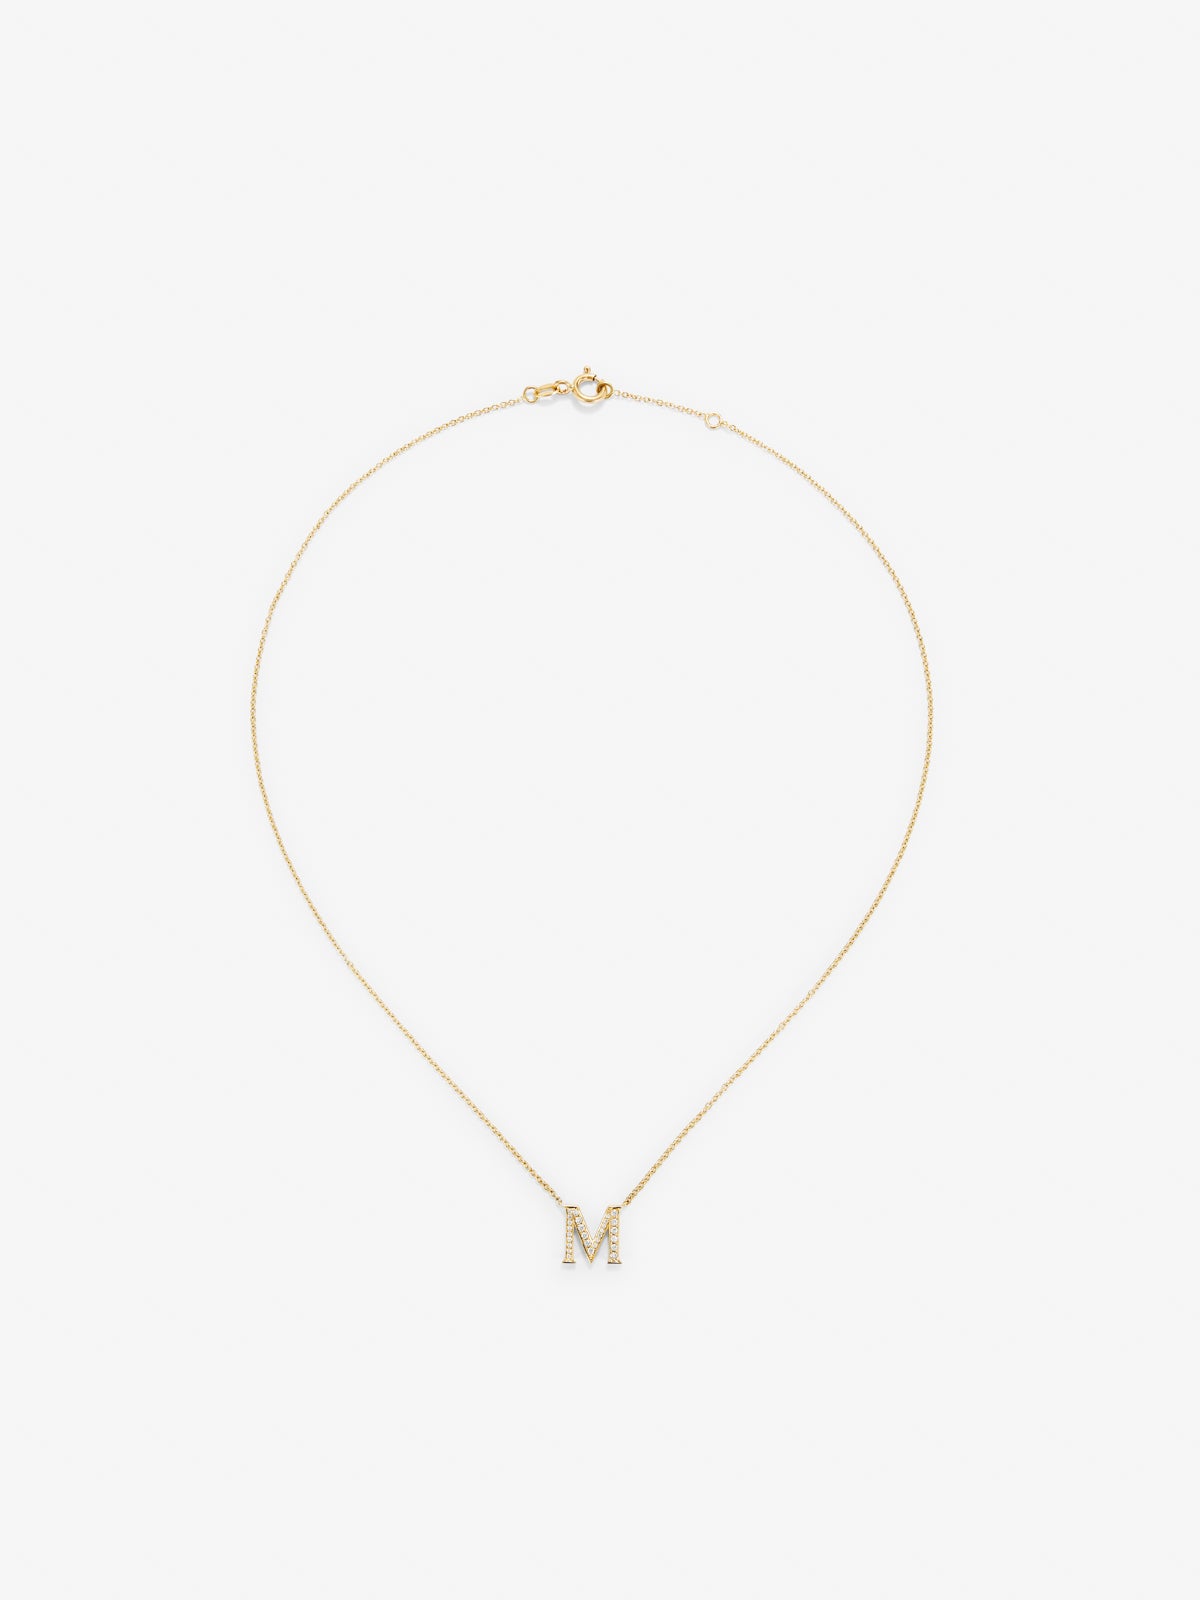 18K yellow gold pendant with m